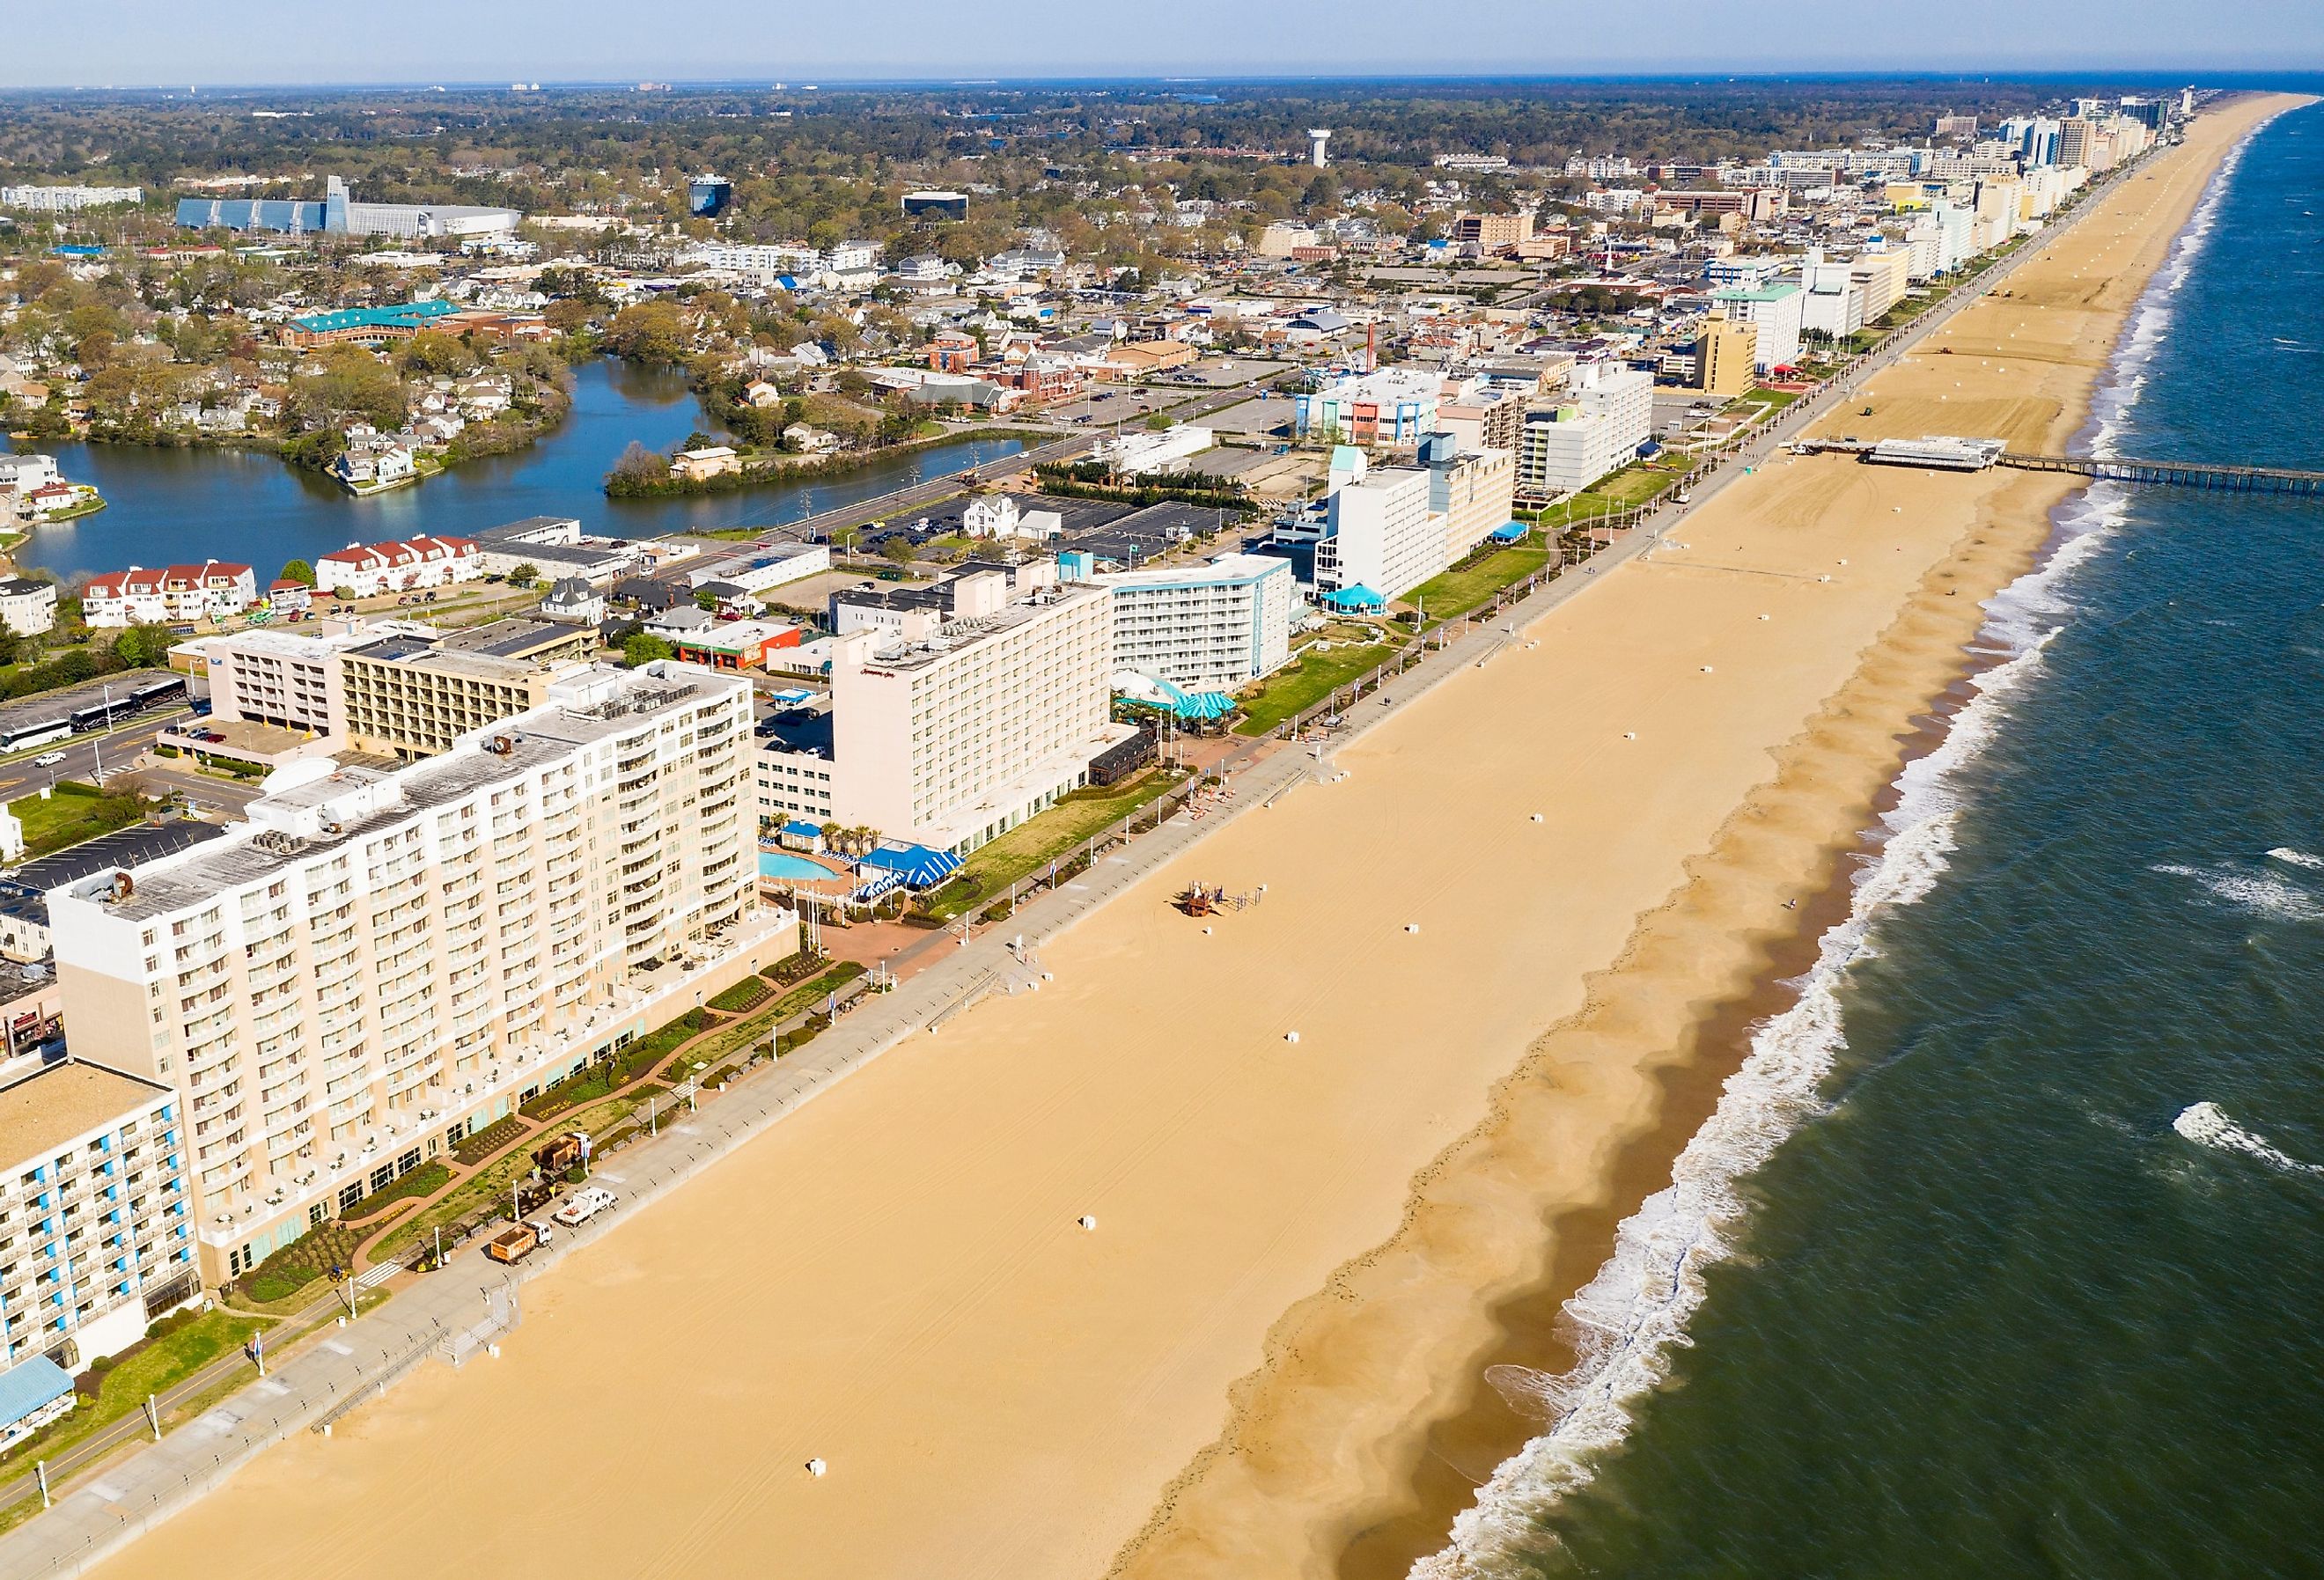 High aerial view of a long row of hotels along the Atlantic Ocean beach in Maryland.